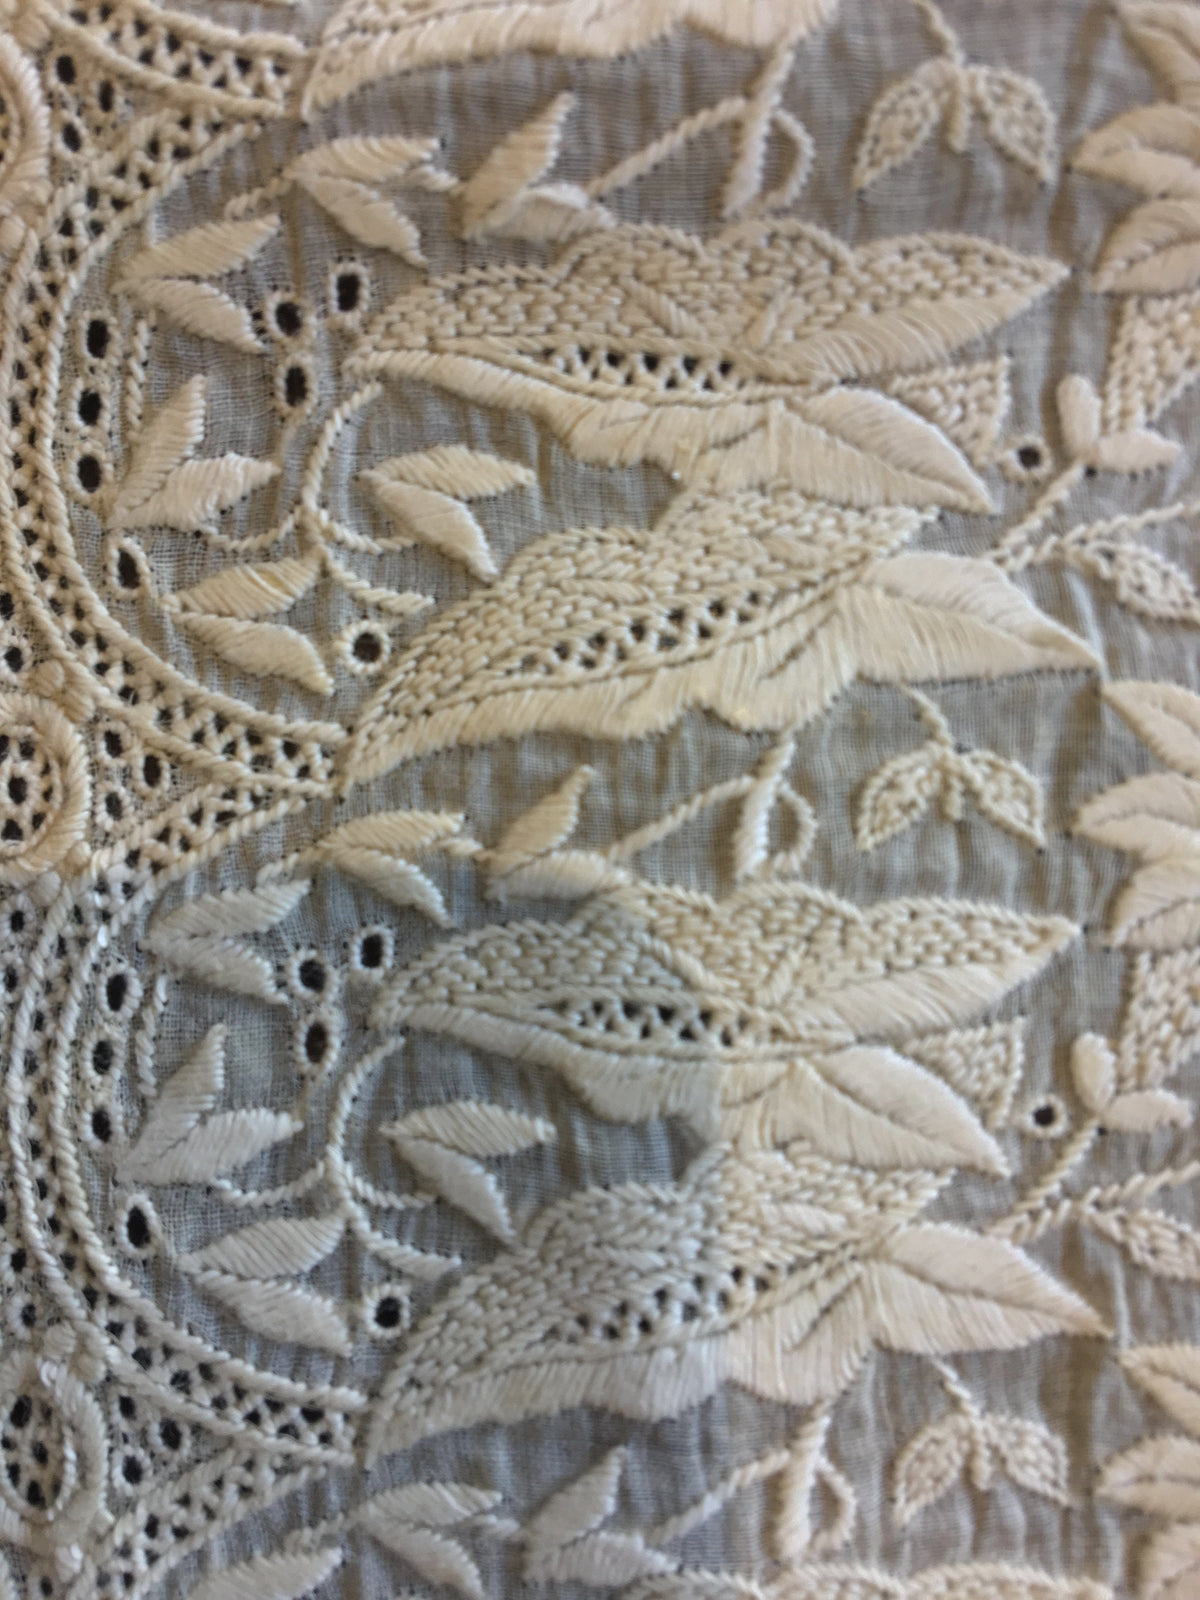 Hand-sewn French Lace, Needlework, 18th-19th Century - Helen Storey Antiques